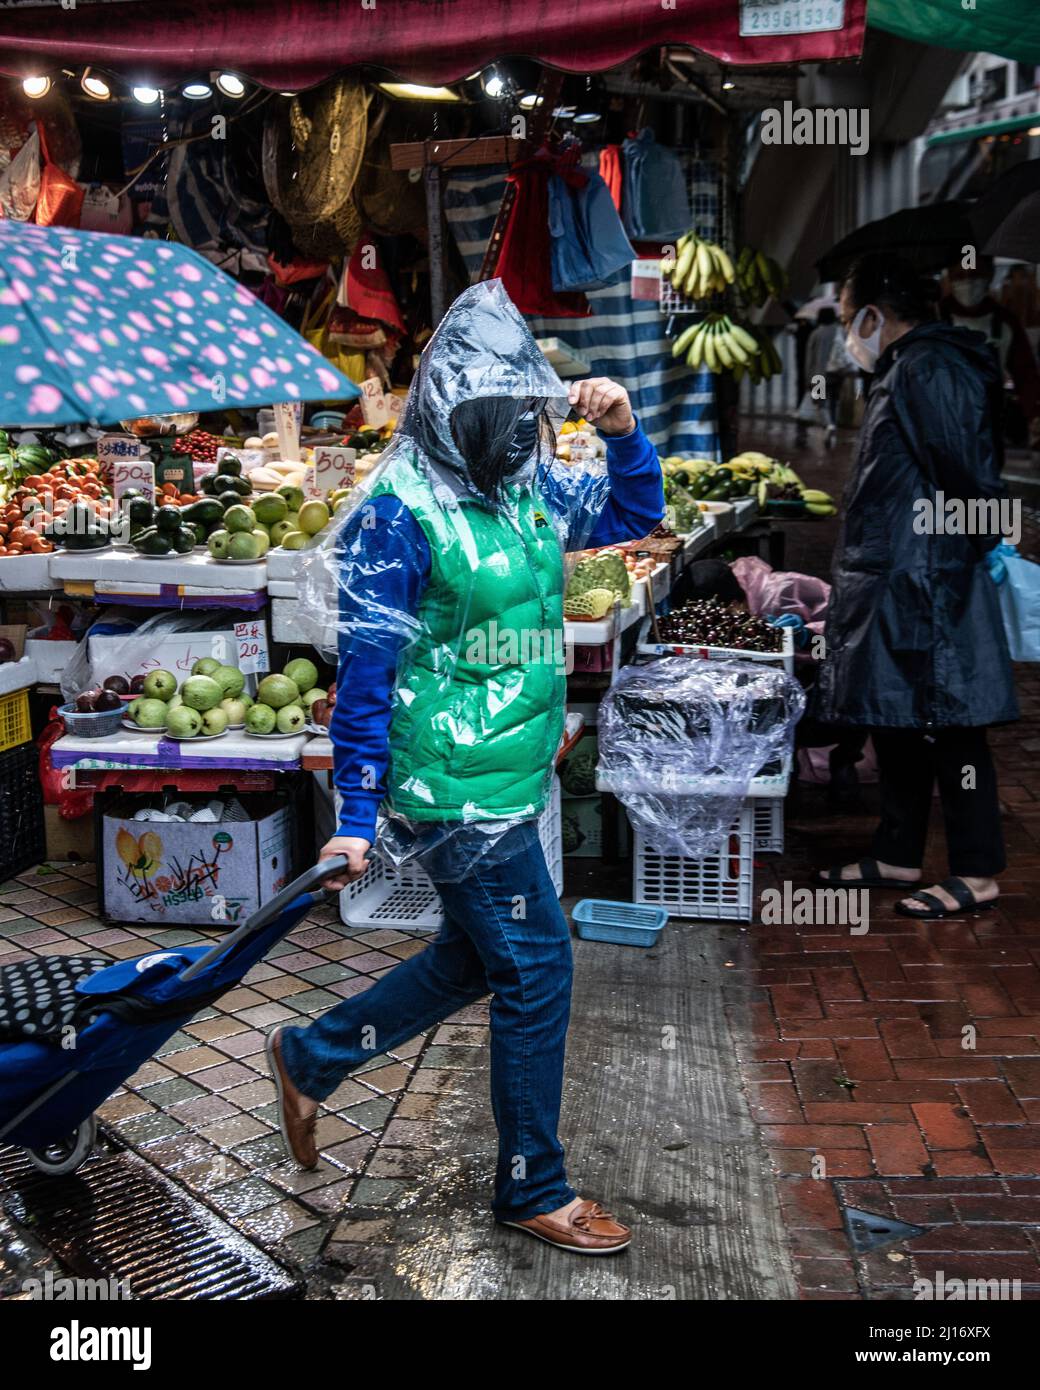 A shopper wearing a raincoat carries his goods from the wet market as a northern monsoon brings cooler weather and rain to Hong Kong. A rainy, spring day in Hong Kong. Stock Photo